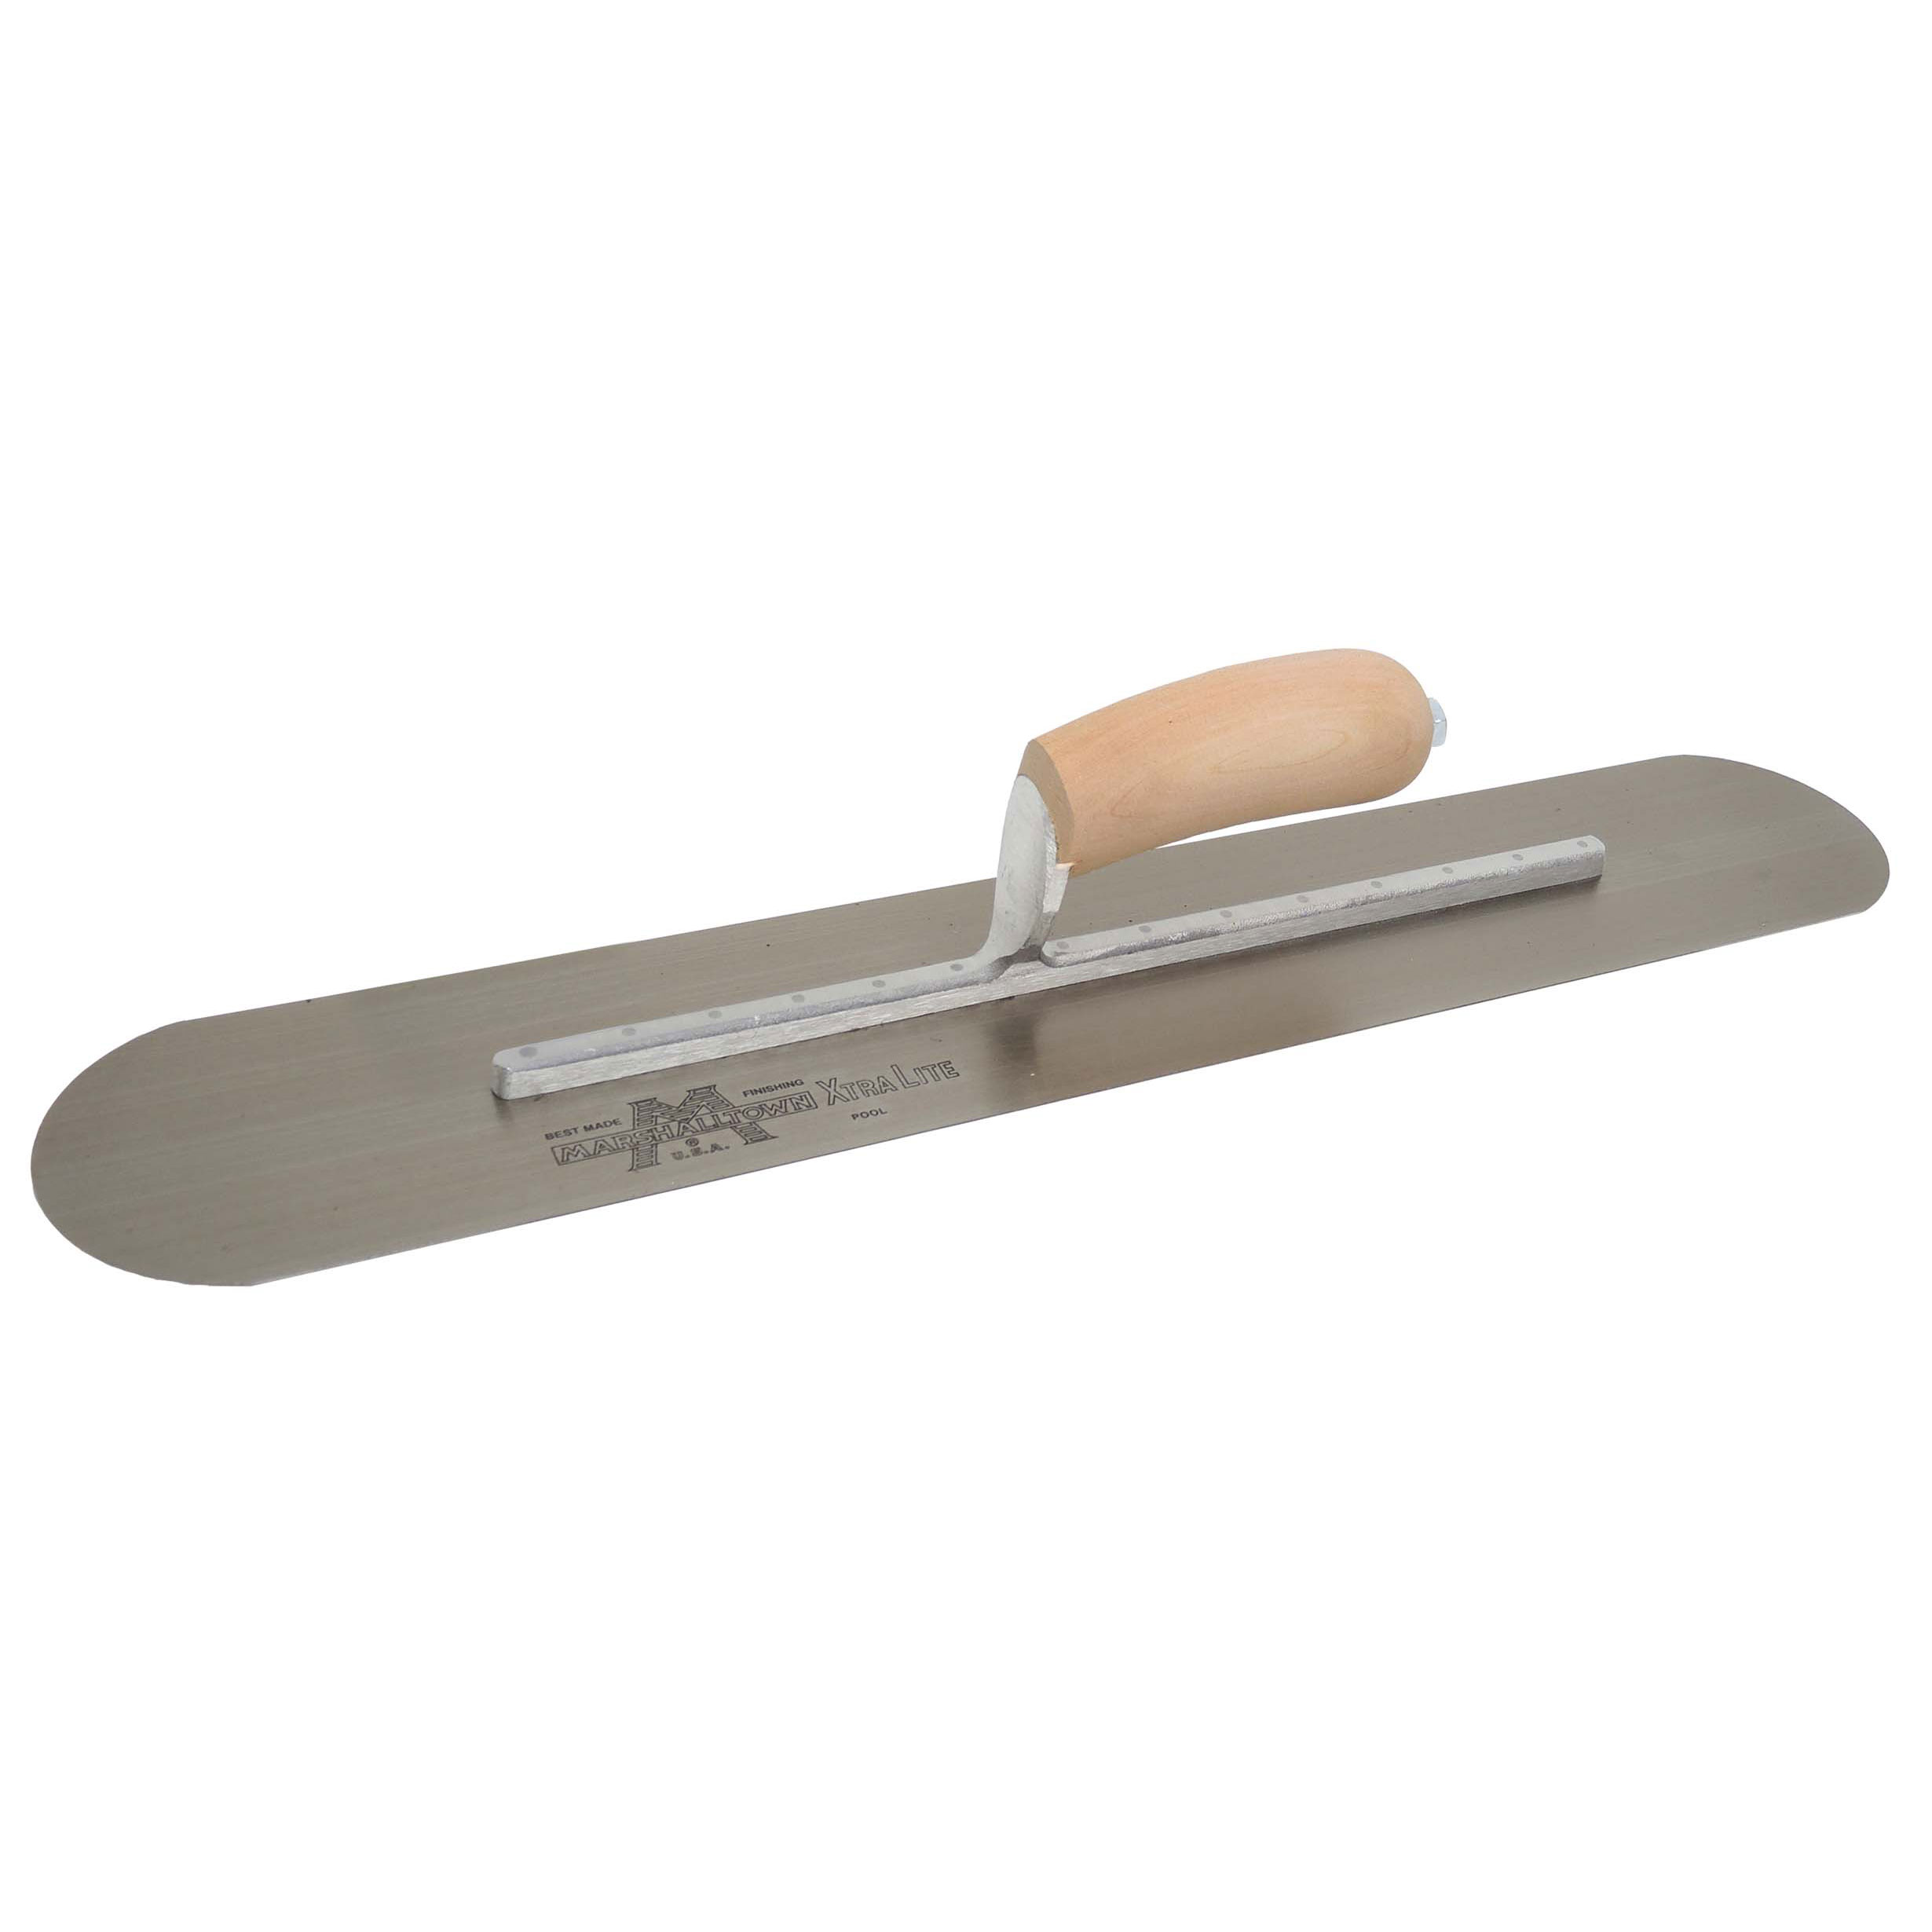 Marshalltown SP245 24in x 5in Pool Trowel with Curved Wood Handle SP245